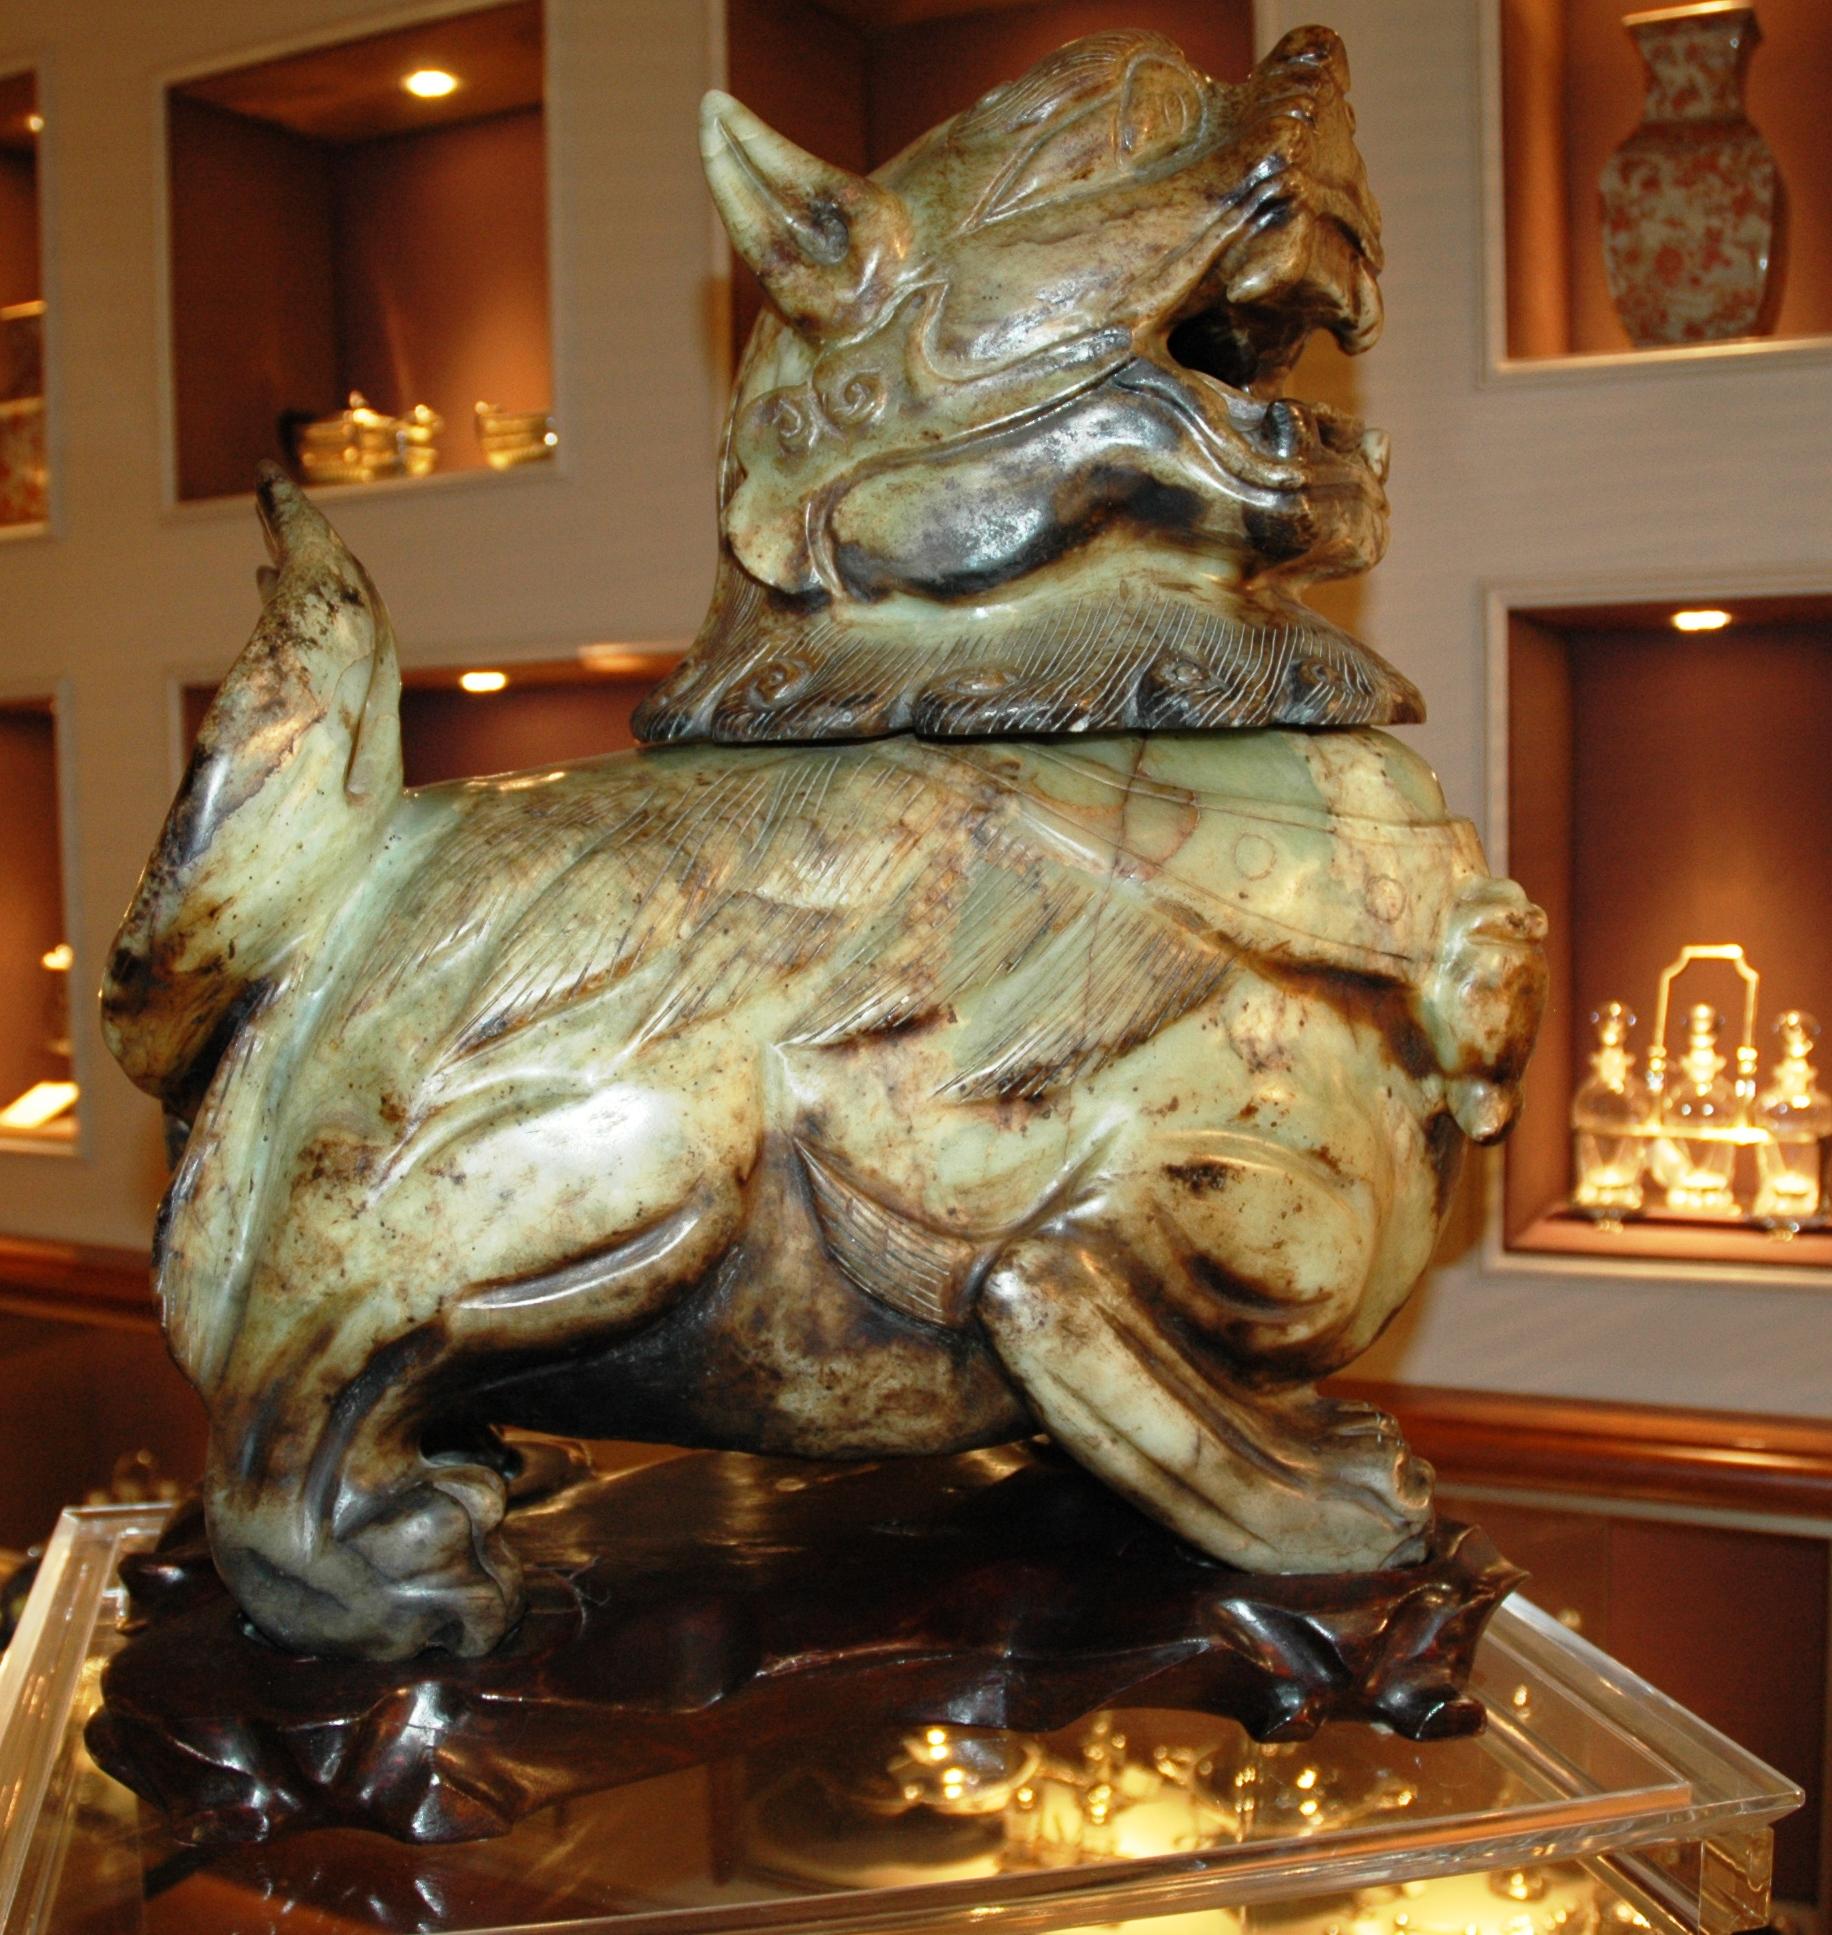 Undergrowth green color jade sculpture depicting a Fo dog. It rests on a shaped wooden base. The sculpture consists of only two jade blocks, the head and body, with a total weight of about one quintal. The head is movable and detachable from the